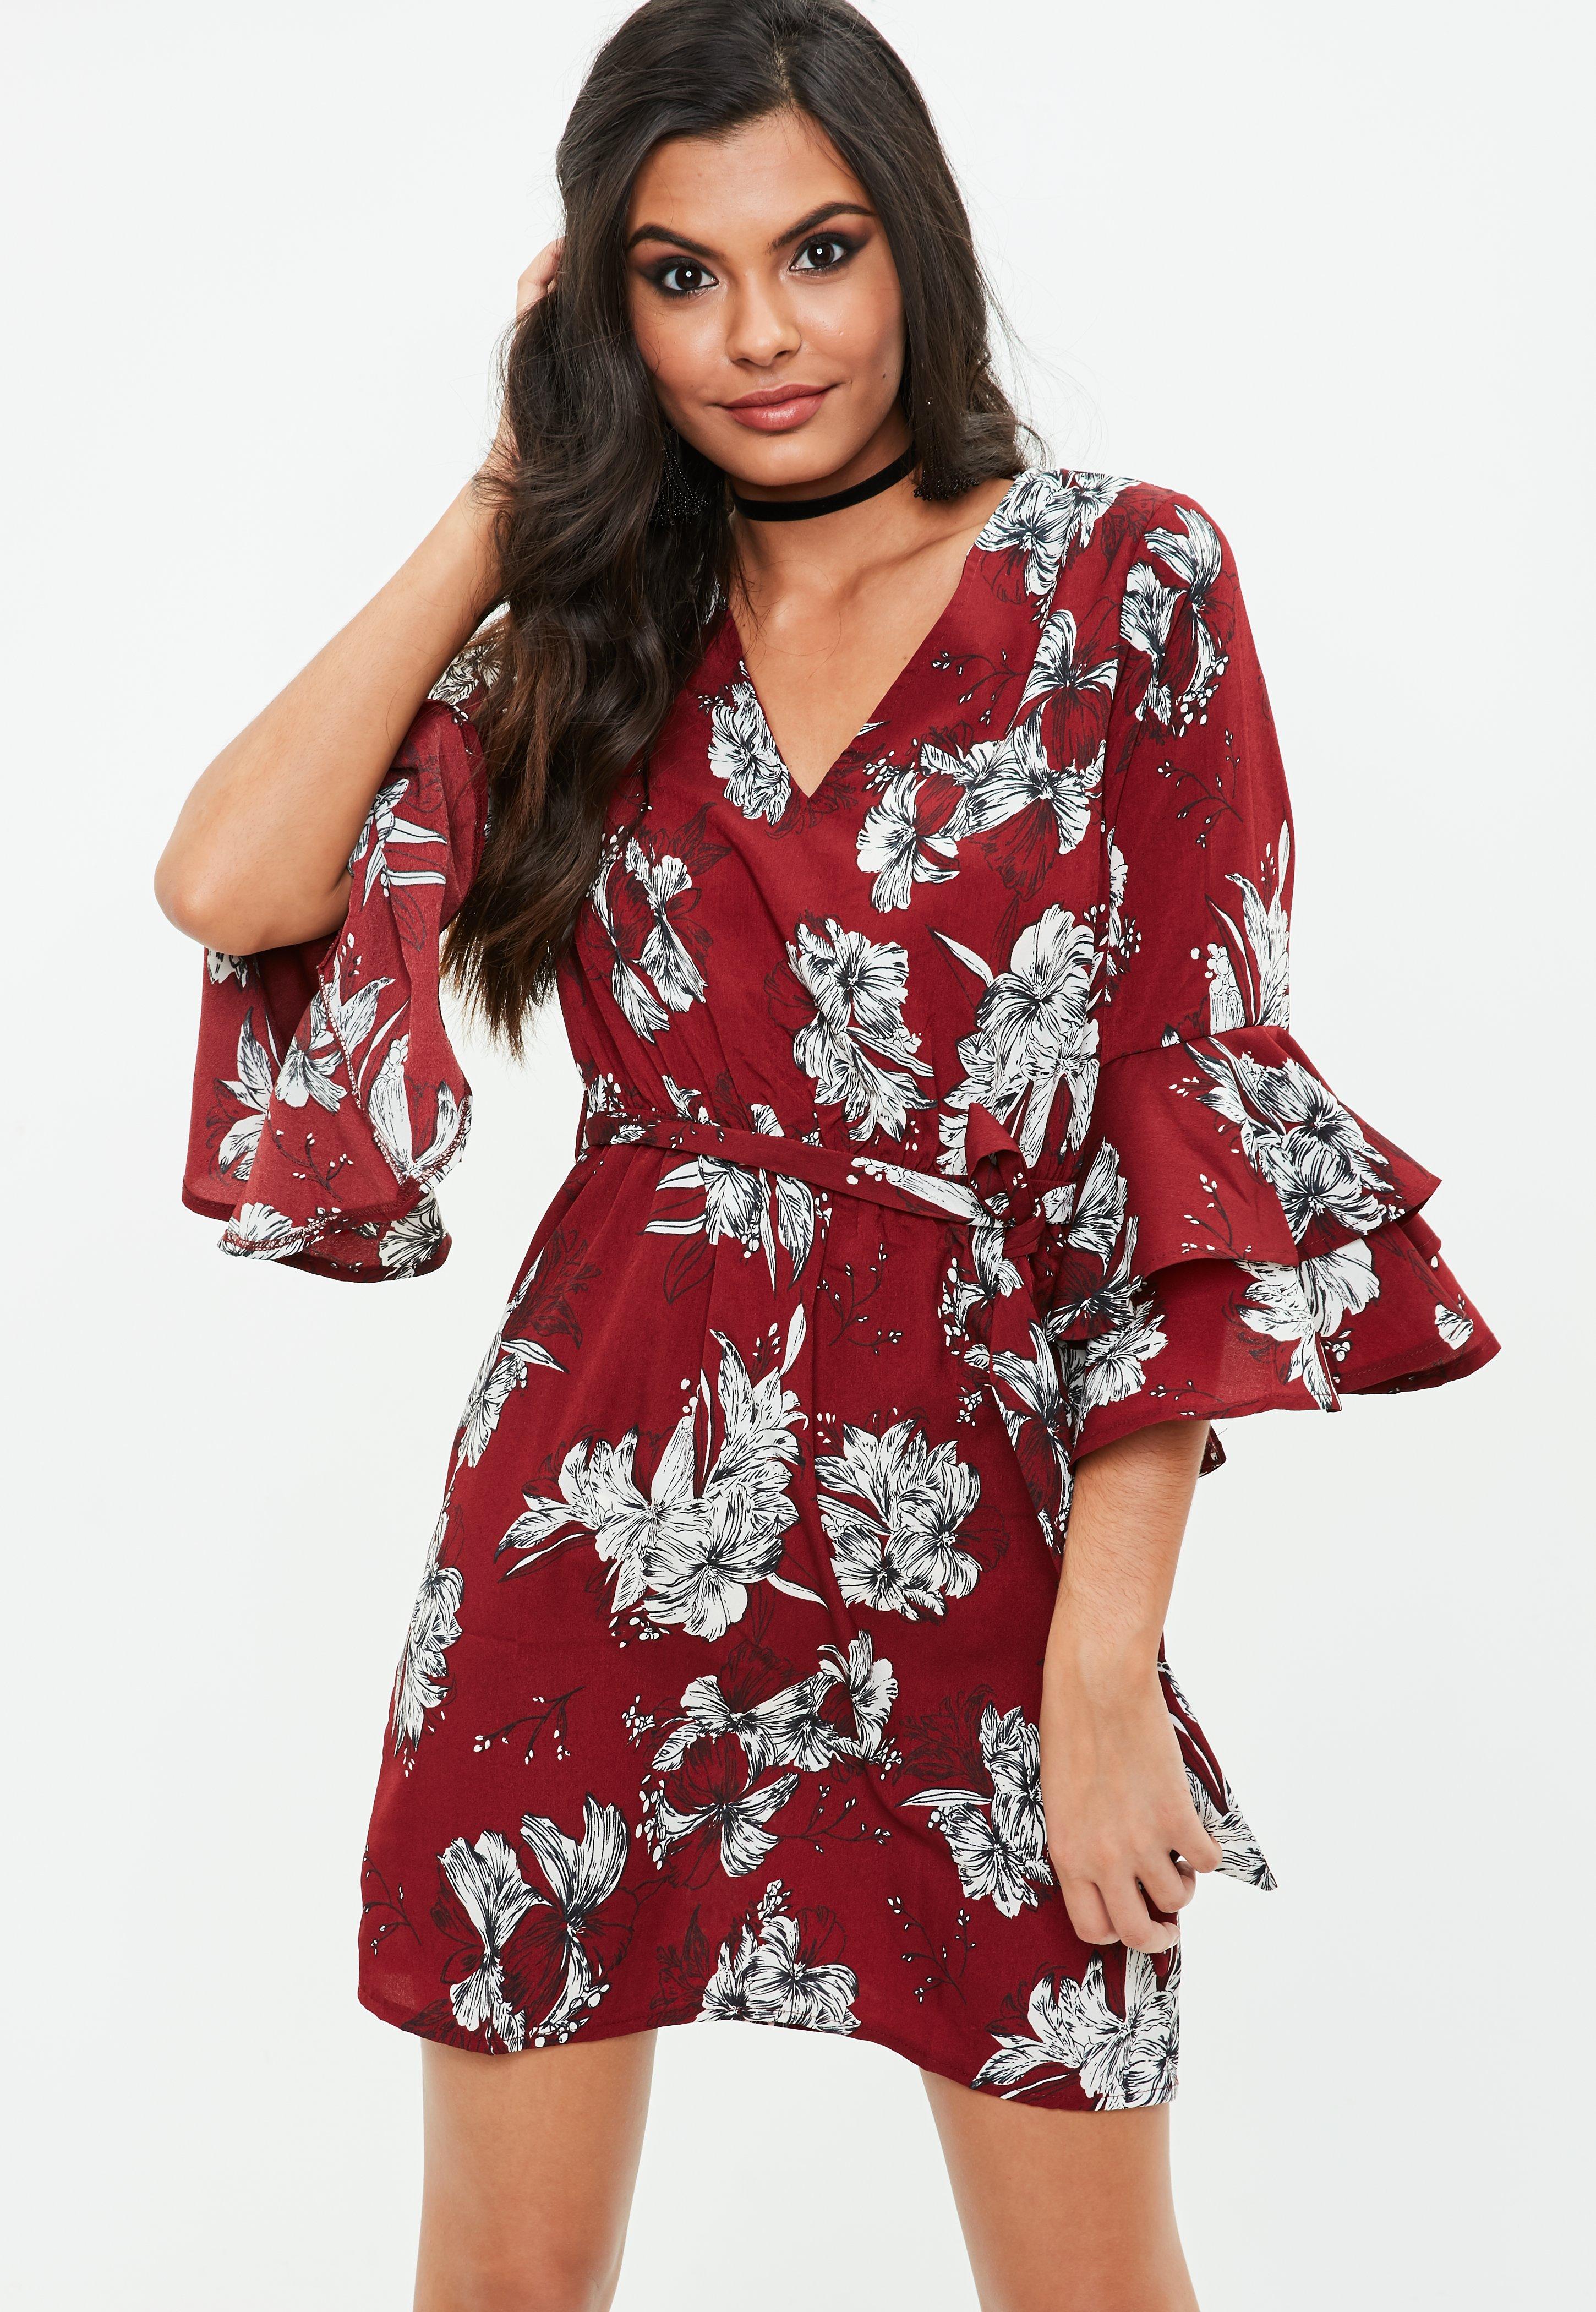 Lyst - Missguided Burgundy Floral Day Dress in Red